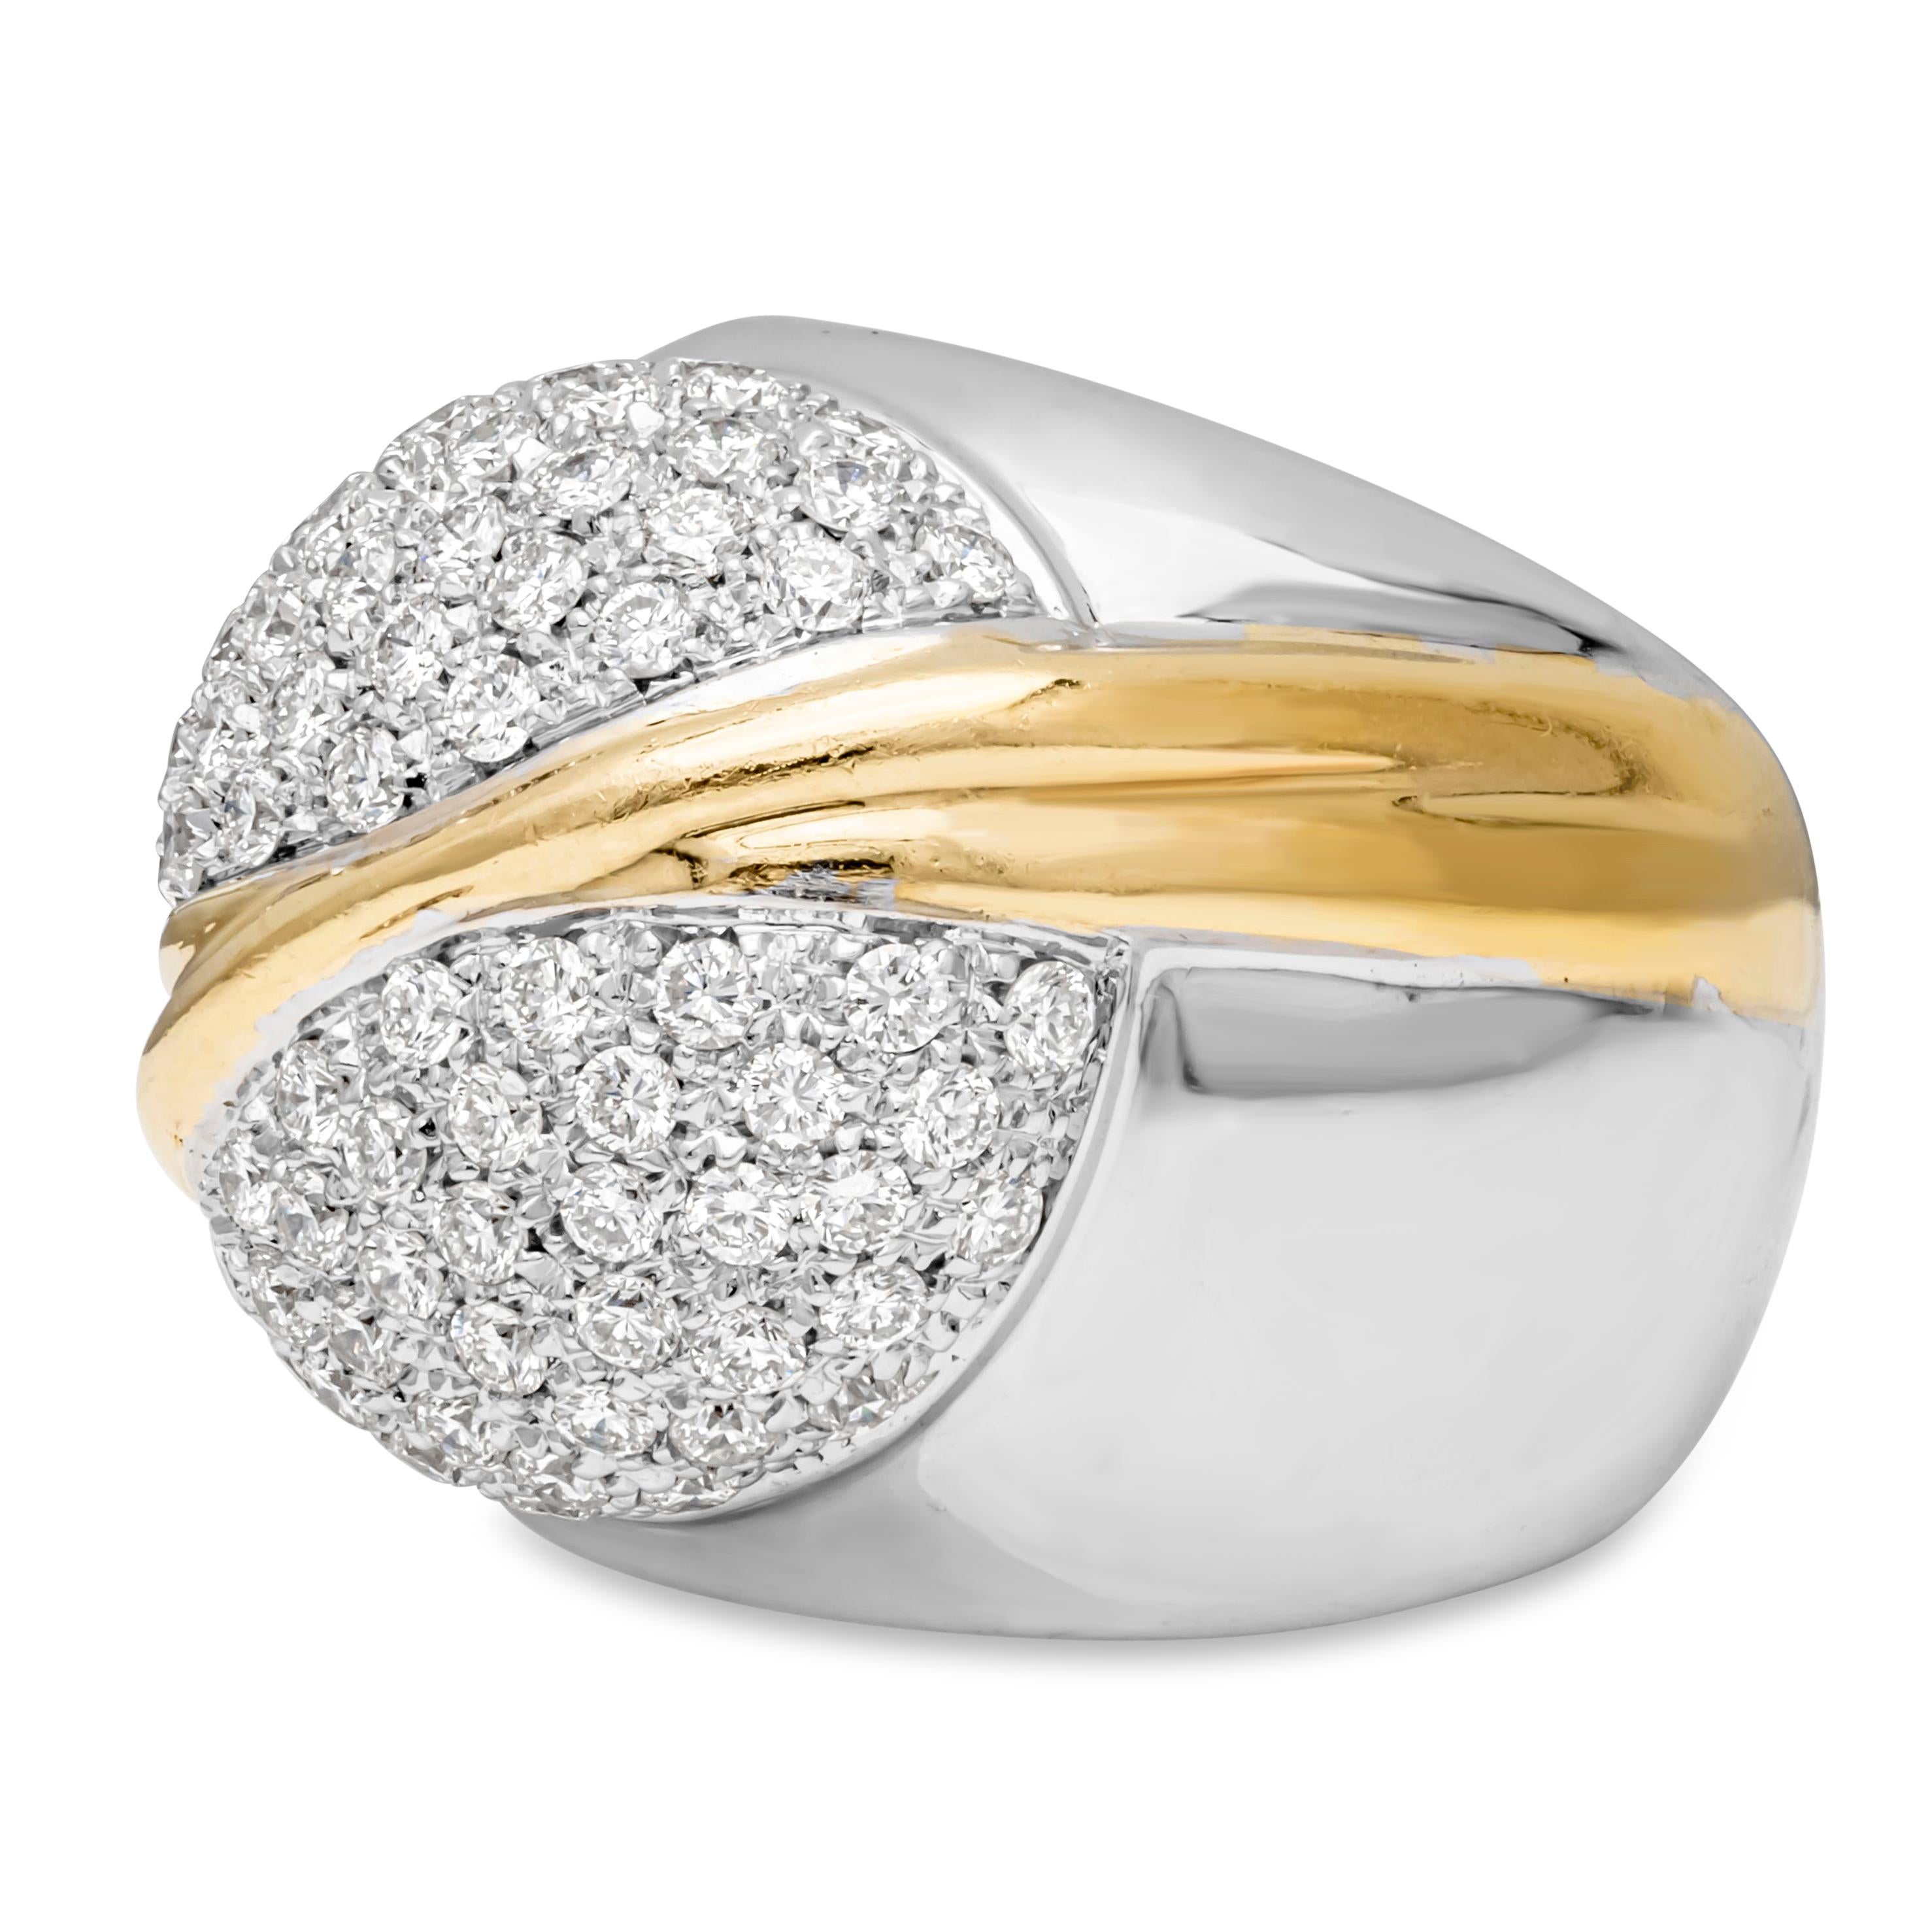 This exquisite and artistic wide fashion ring showcases 78 brilliant round cut diamonds set in a timeless micro-pave dome design weighing 3.06 carats total, G color and VS-SI in clarity. Perfectly made in 18k white and yellow gold. Size 6.5 US